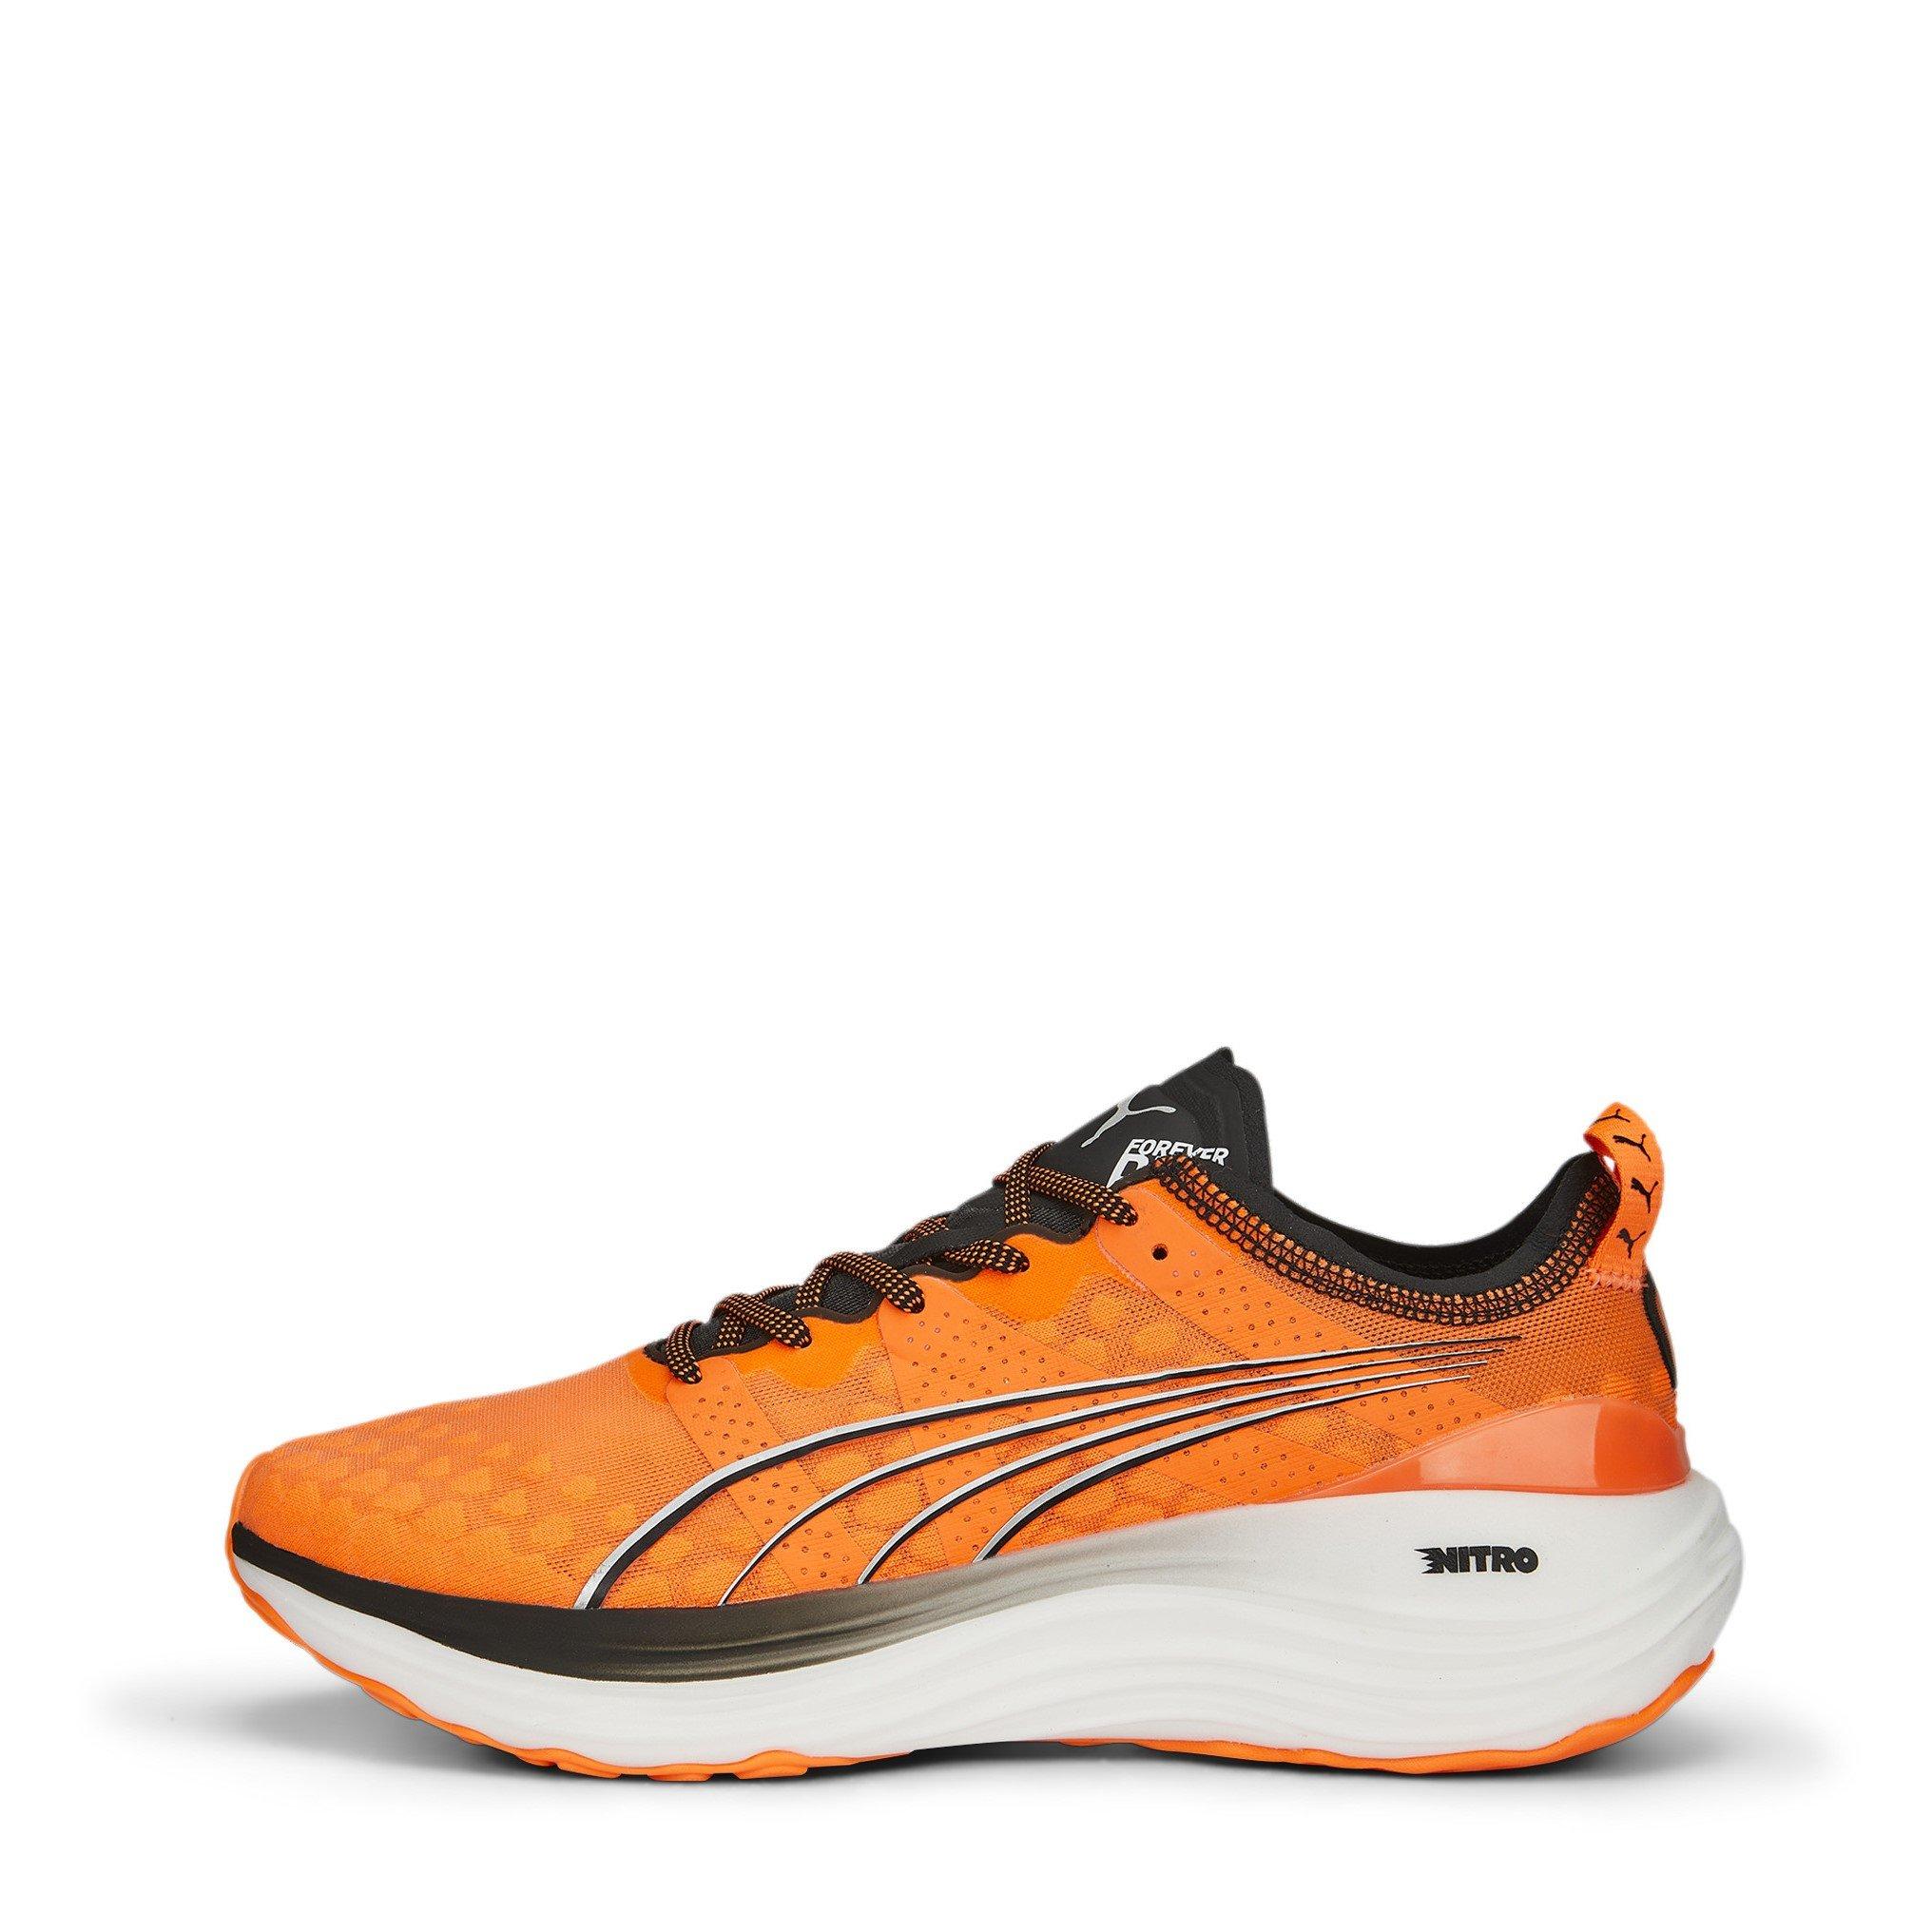 Puma | Forever Run NITRO Mens Running Shoes | Everyday Stable Road ...